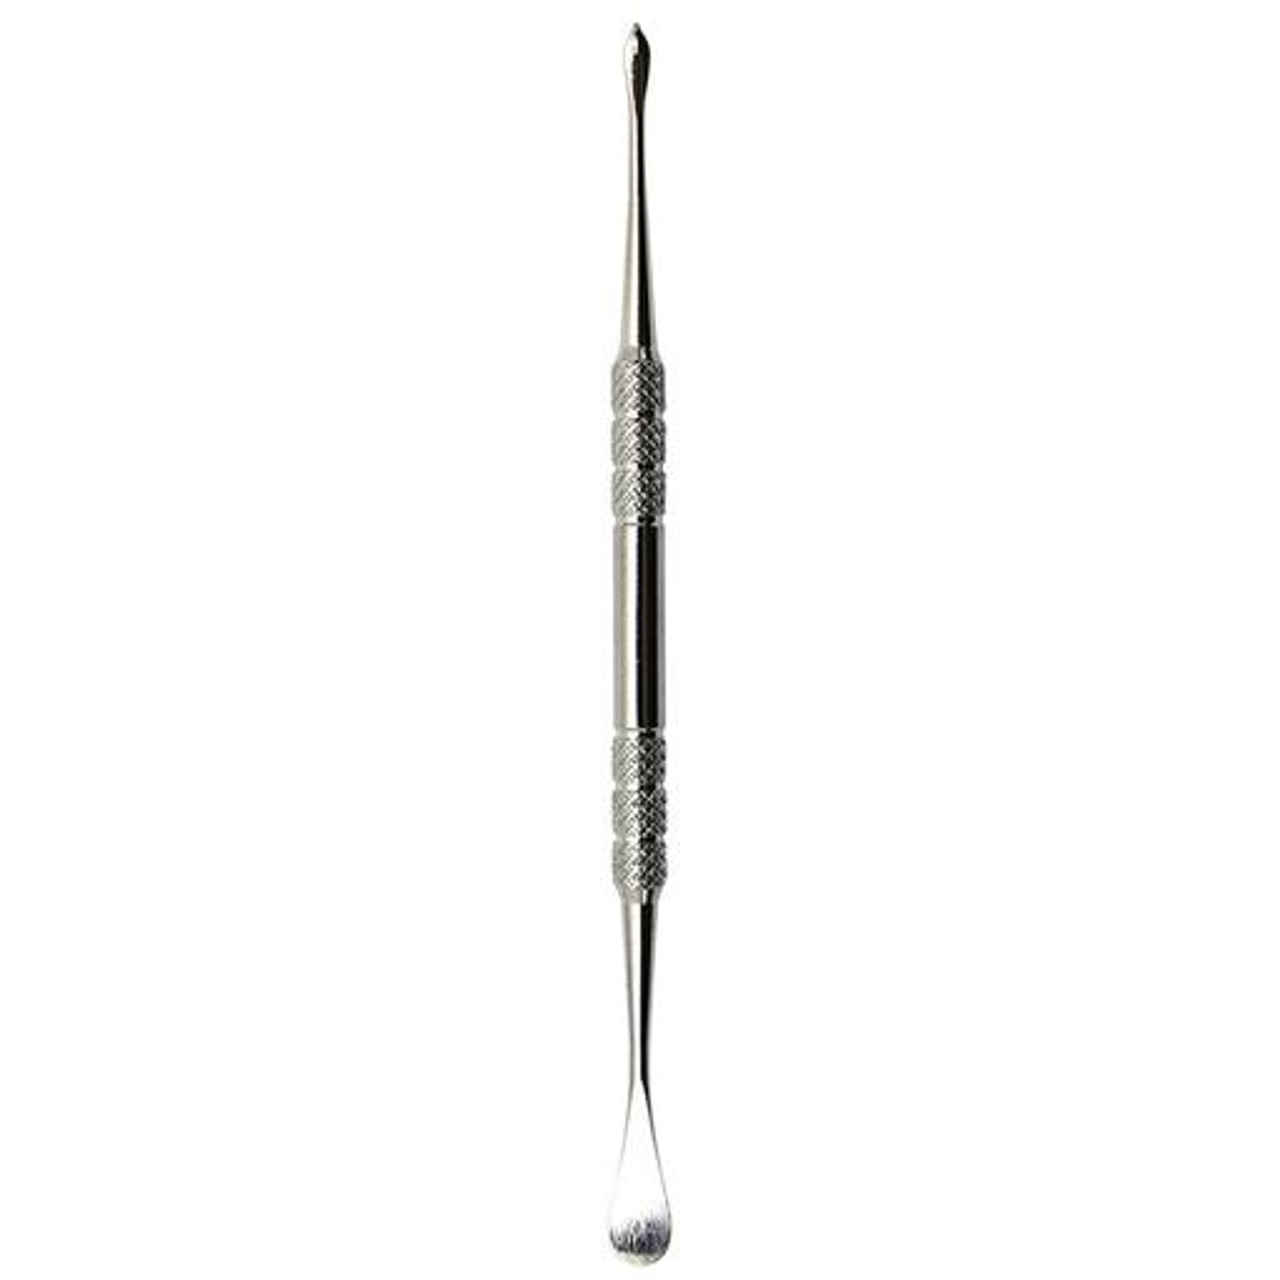 Blaze Tools - Medical Grade Stainless Steel Dab Tools - Bow & Arrow